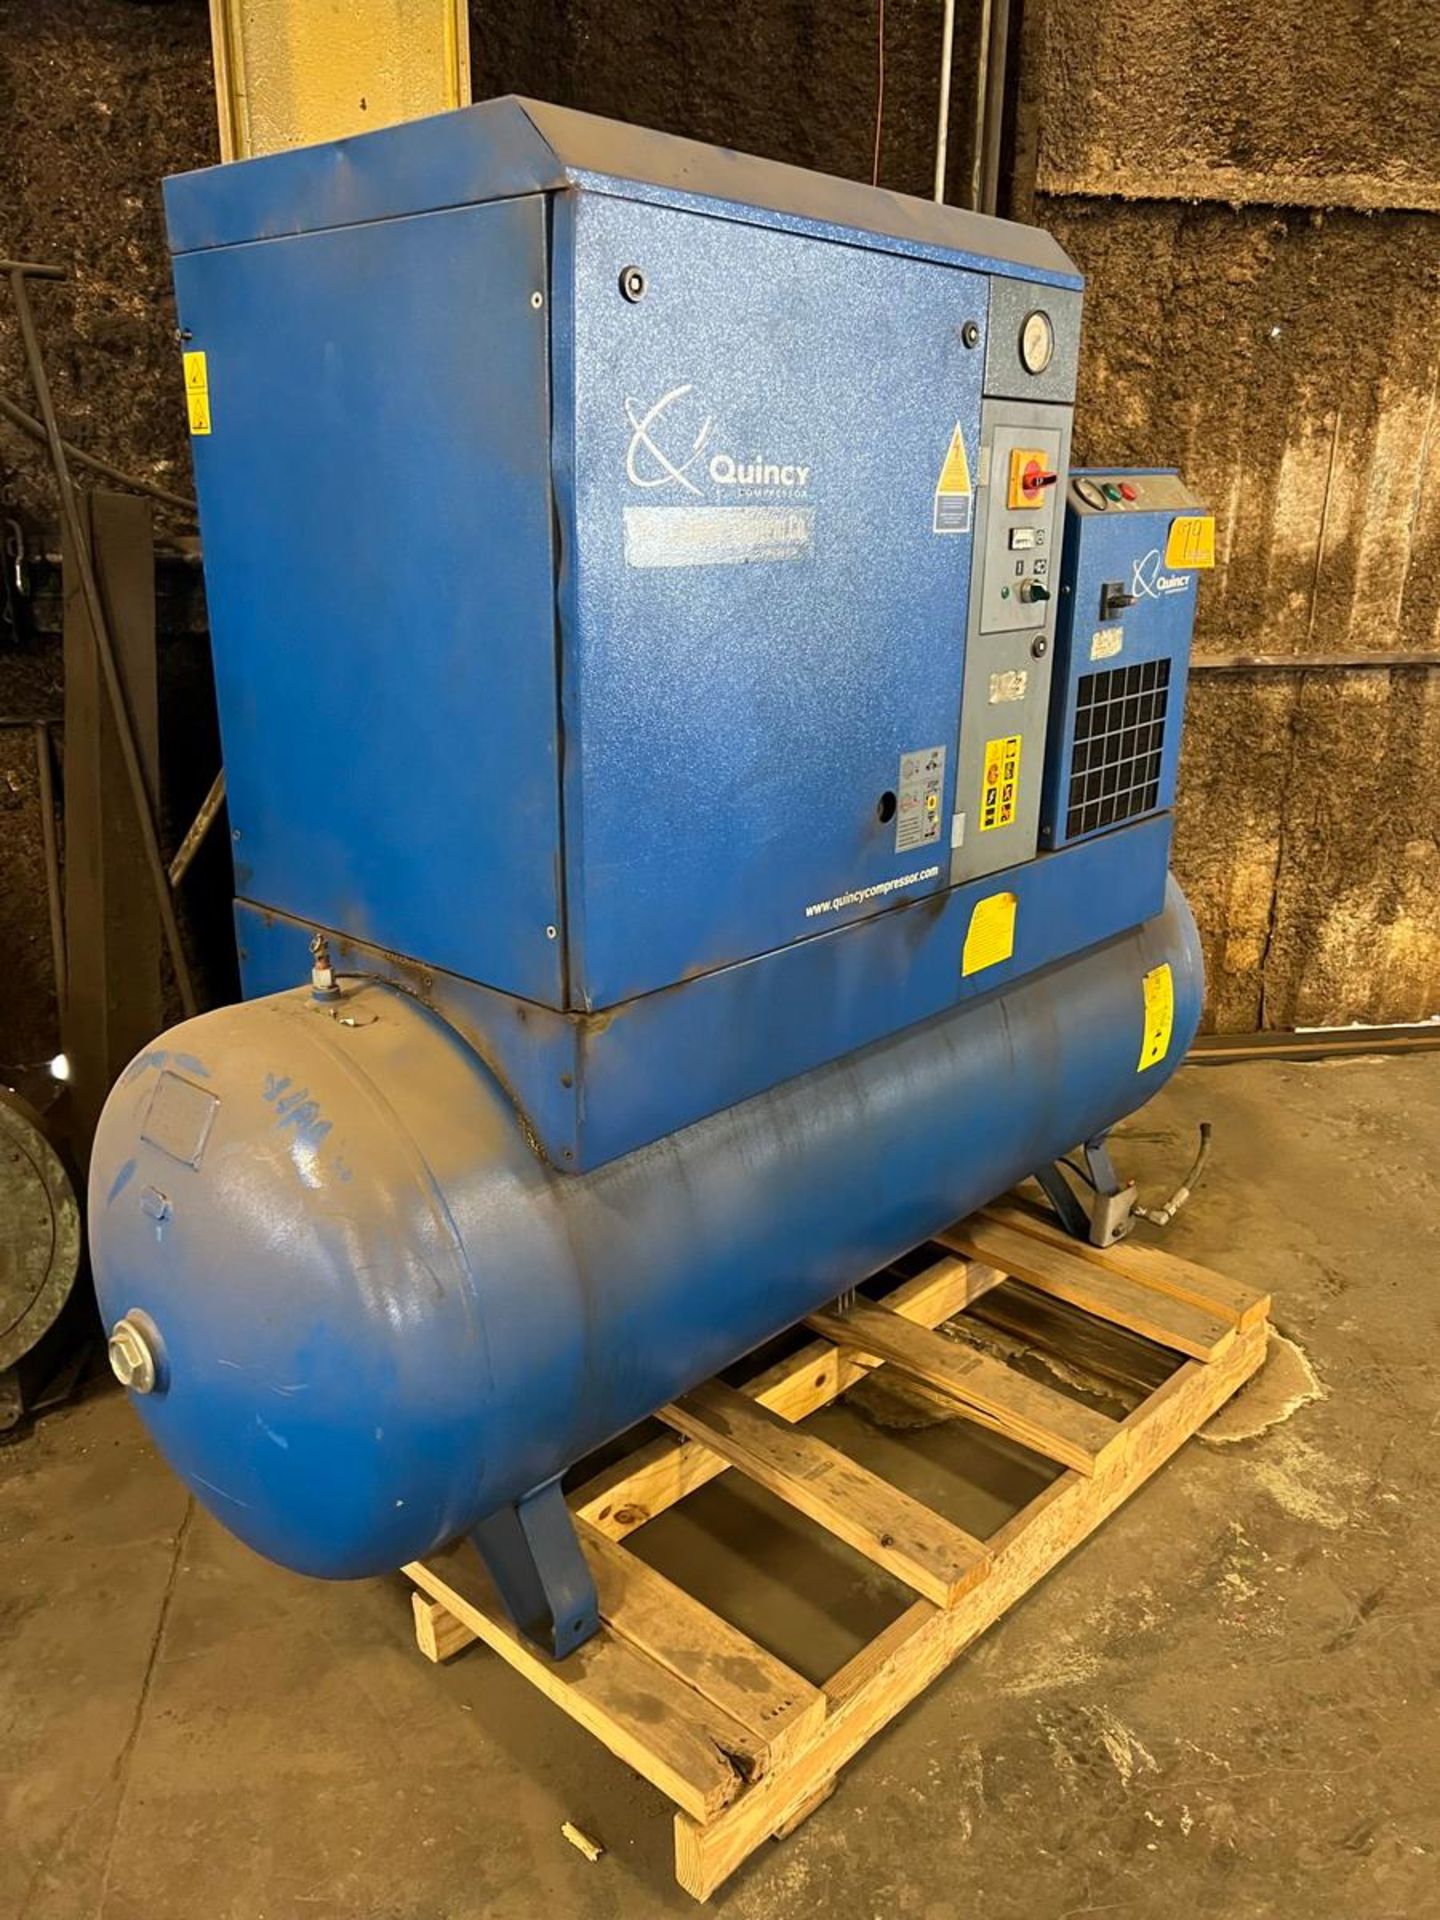 2007 Quincy 15 Hp. Air compressor - Image 3 of 4